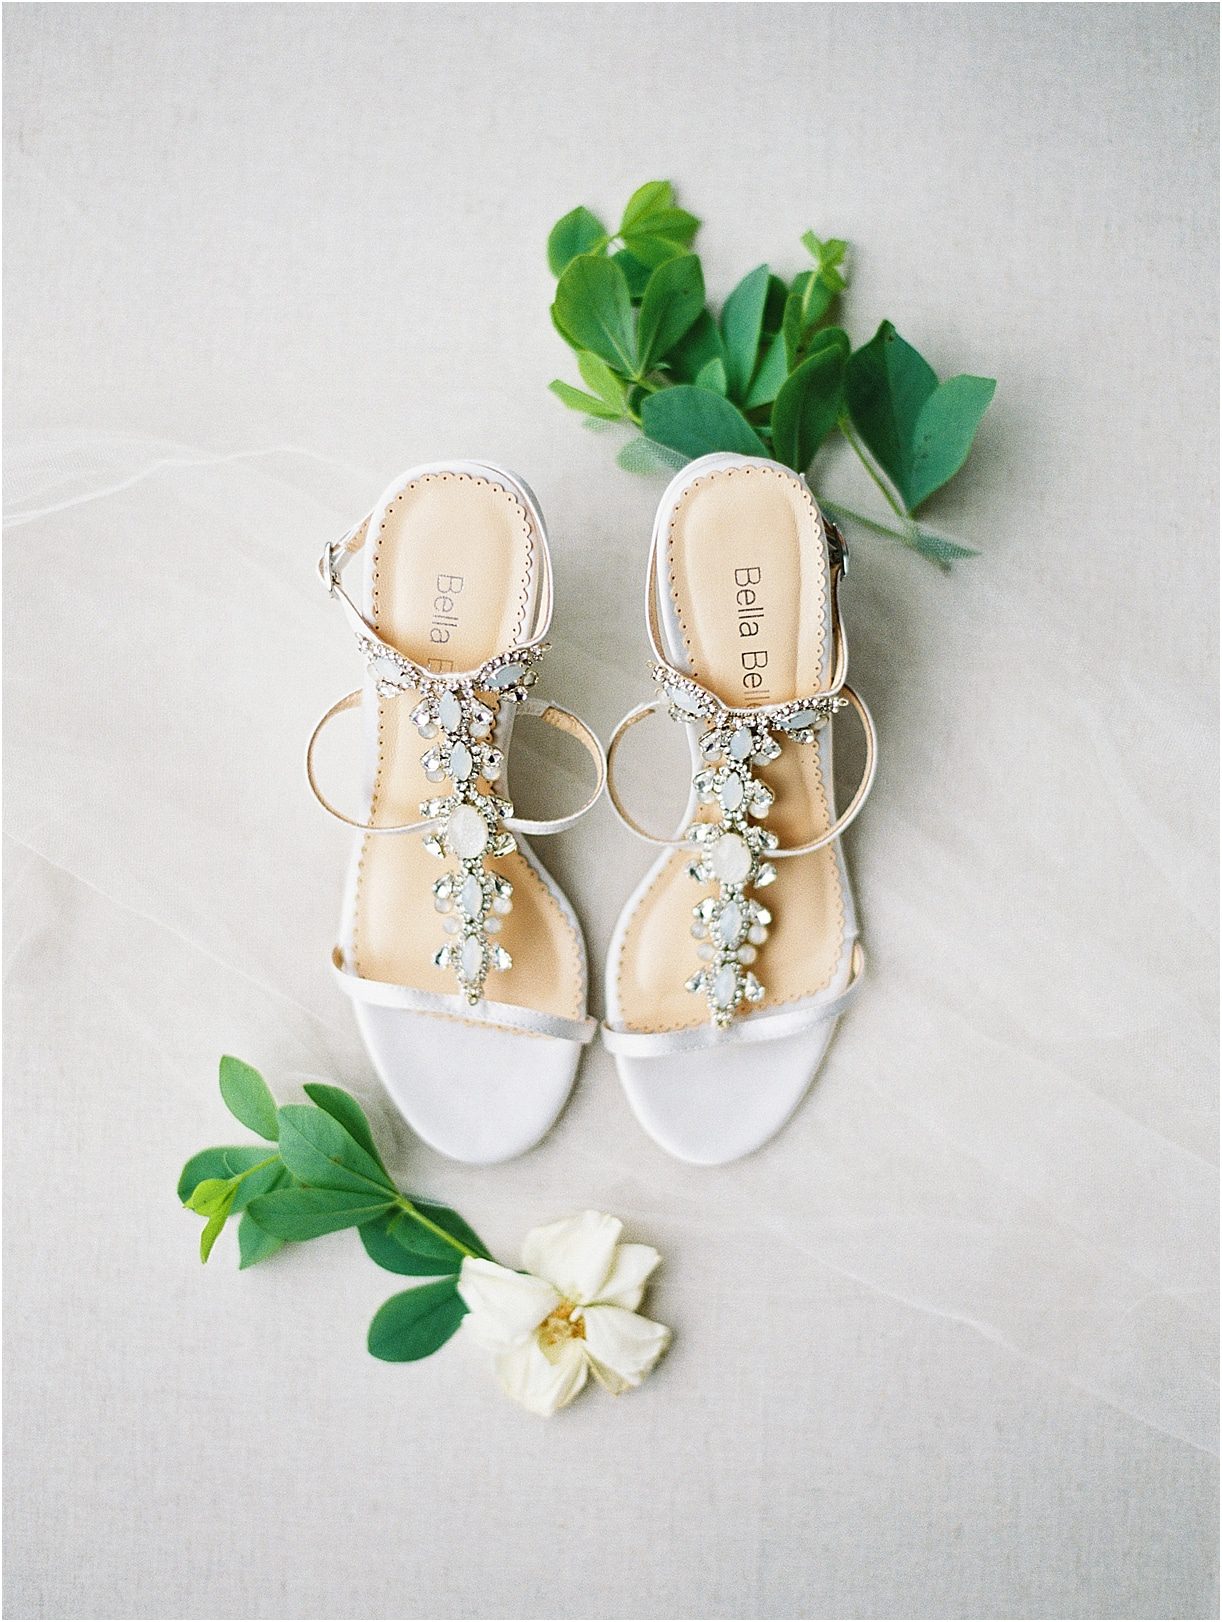 Peach Inspired Wedding Inspiration at the Arboretum Bridal Shoes